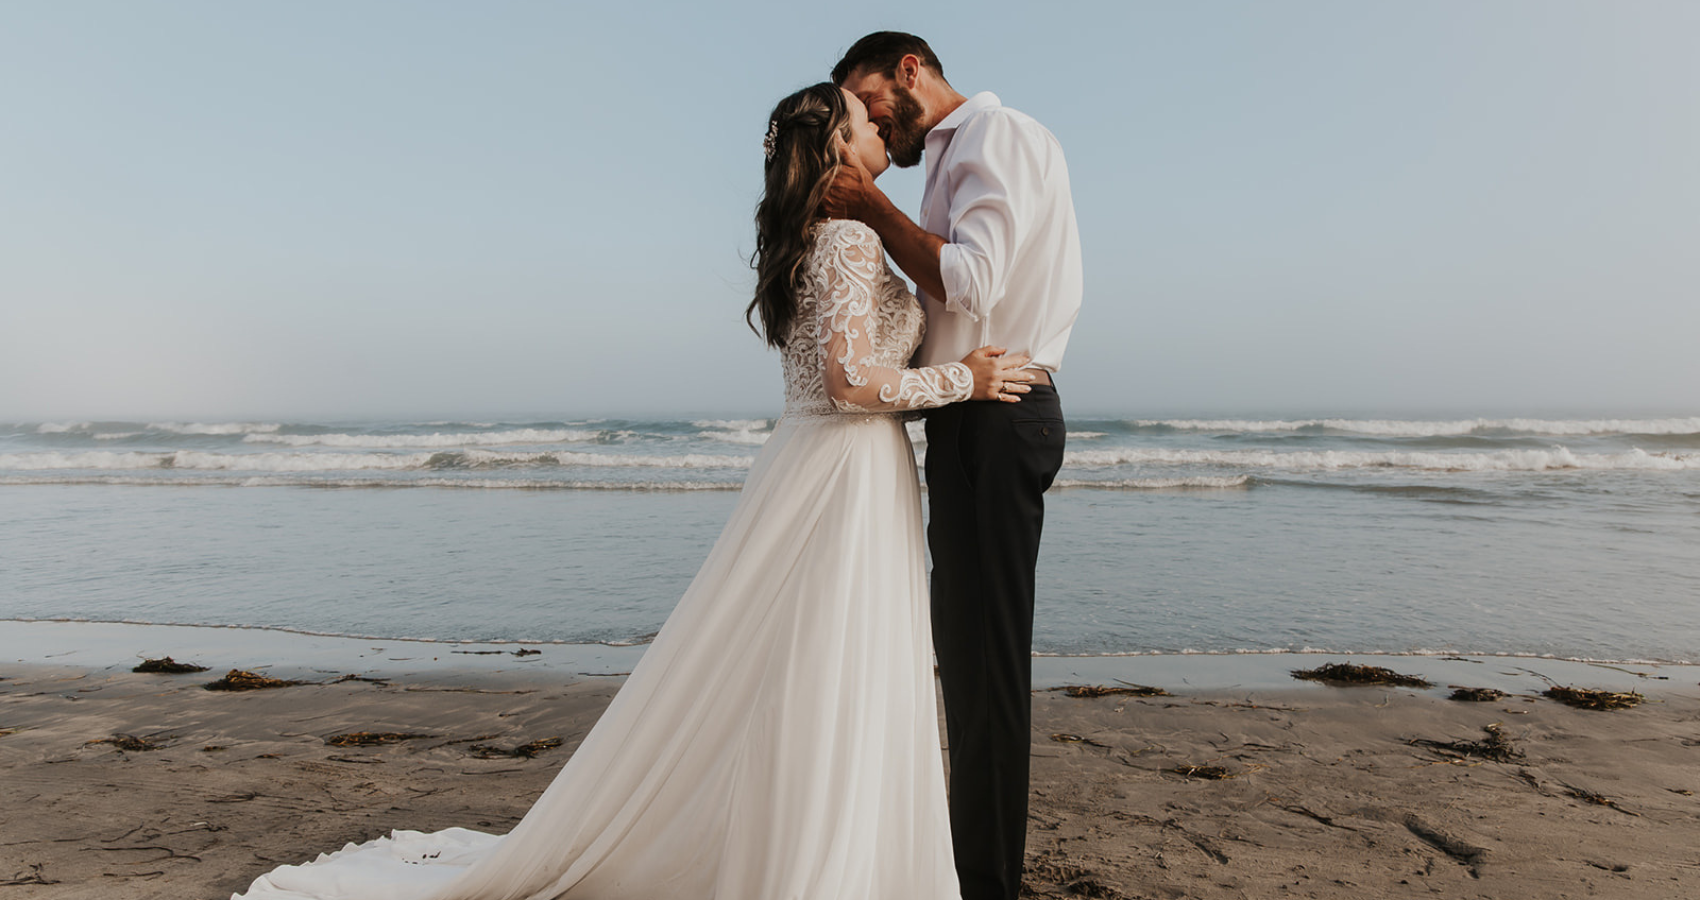 Bride In Casual Wedding Dresses Called Lorraine Dawn By Rebecca Ingram With Husband On Beach